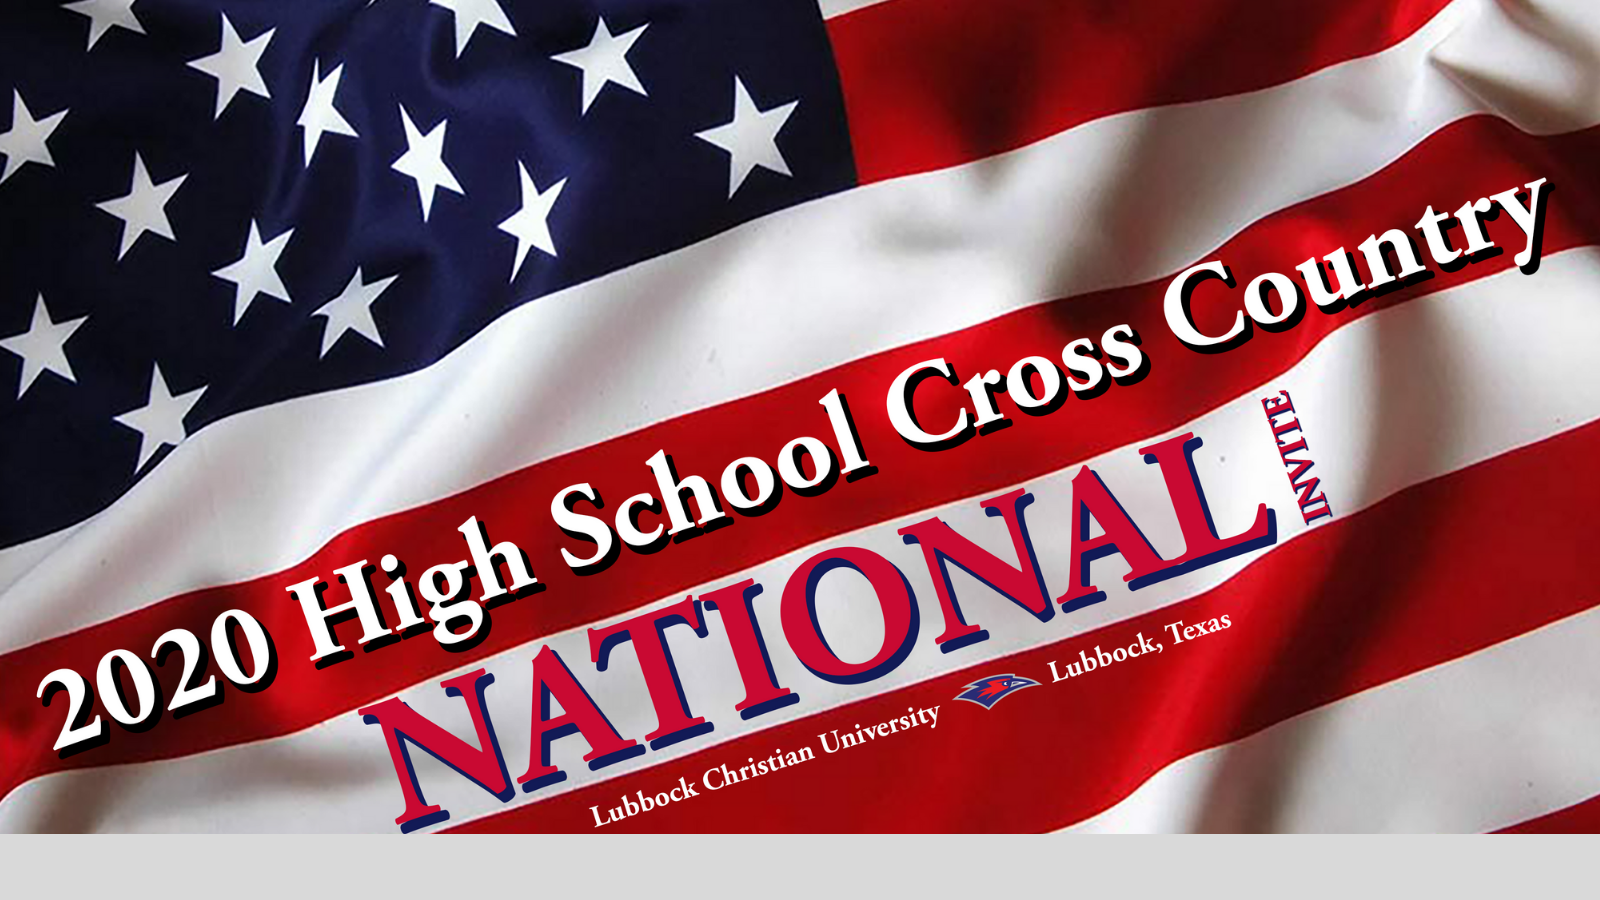 High School Cross Country National Invite To Take Place December 5th in